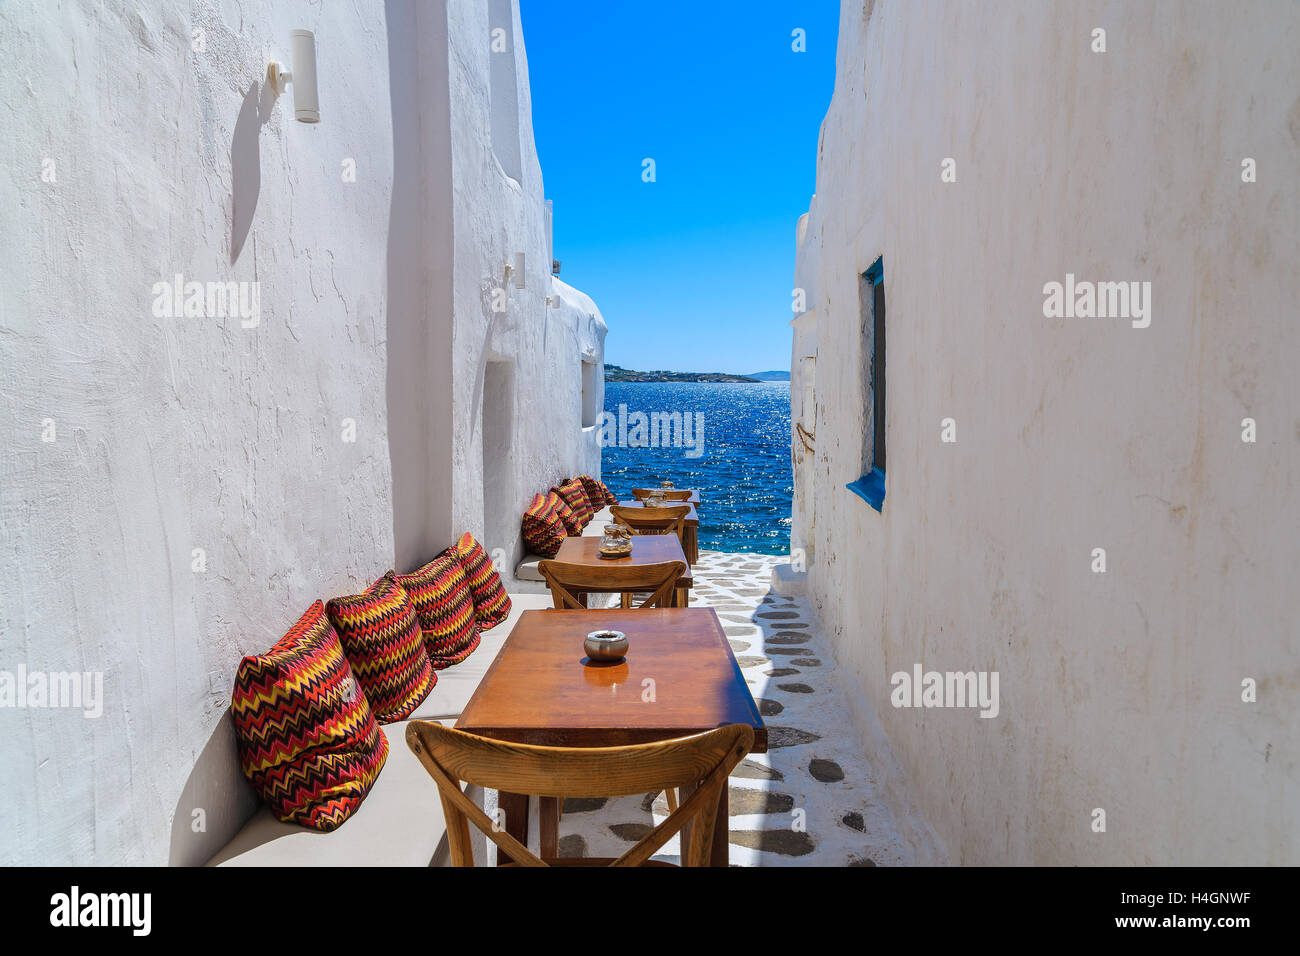 Benches with pillows in a typical Greek bar in Mykonos town with sea view, Cyclades islands, Greece Stock Photo